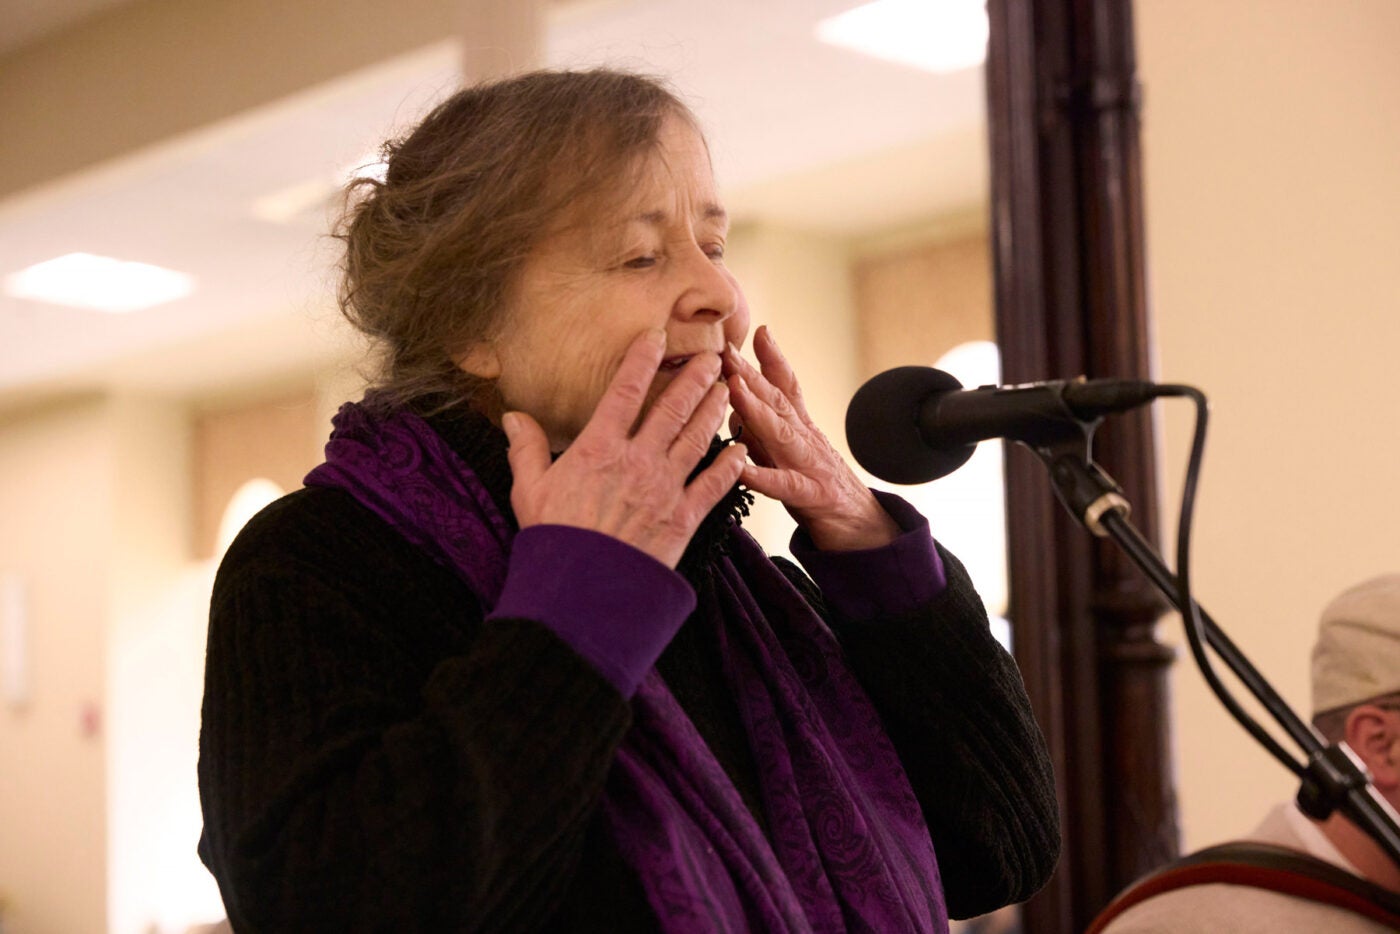 A woman expressively sings with her hands touching her lips.